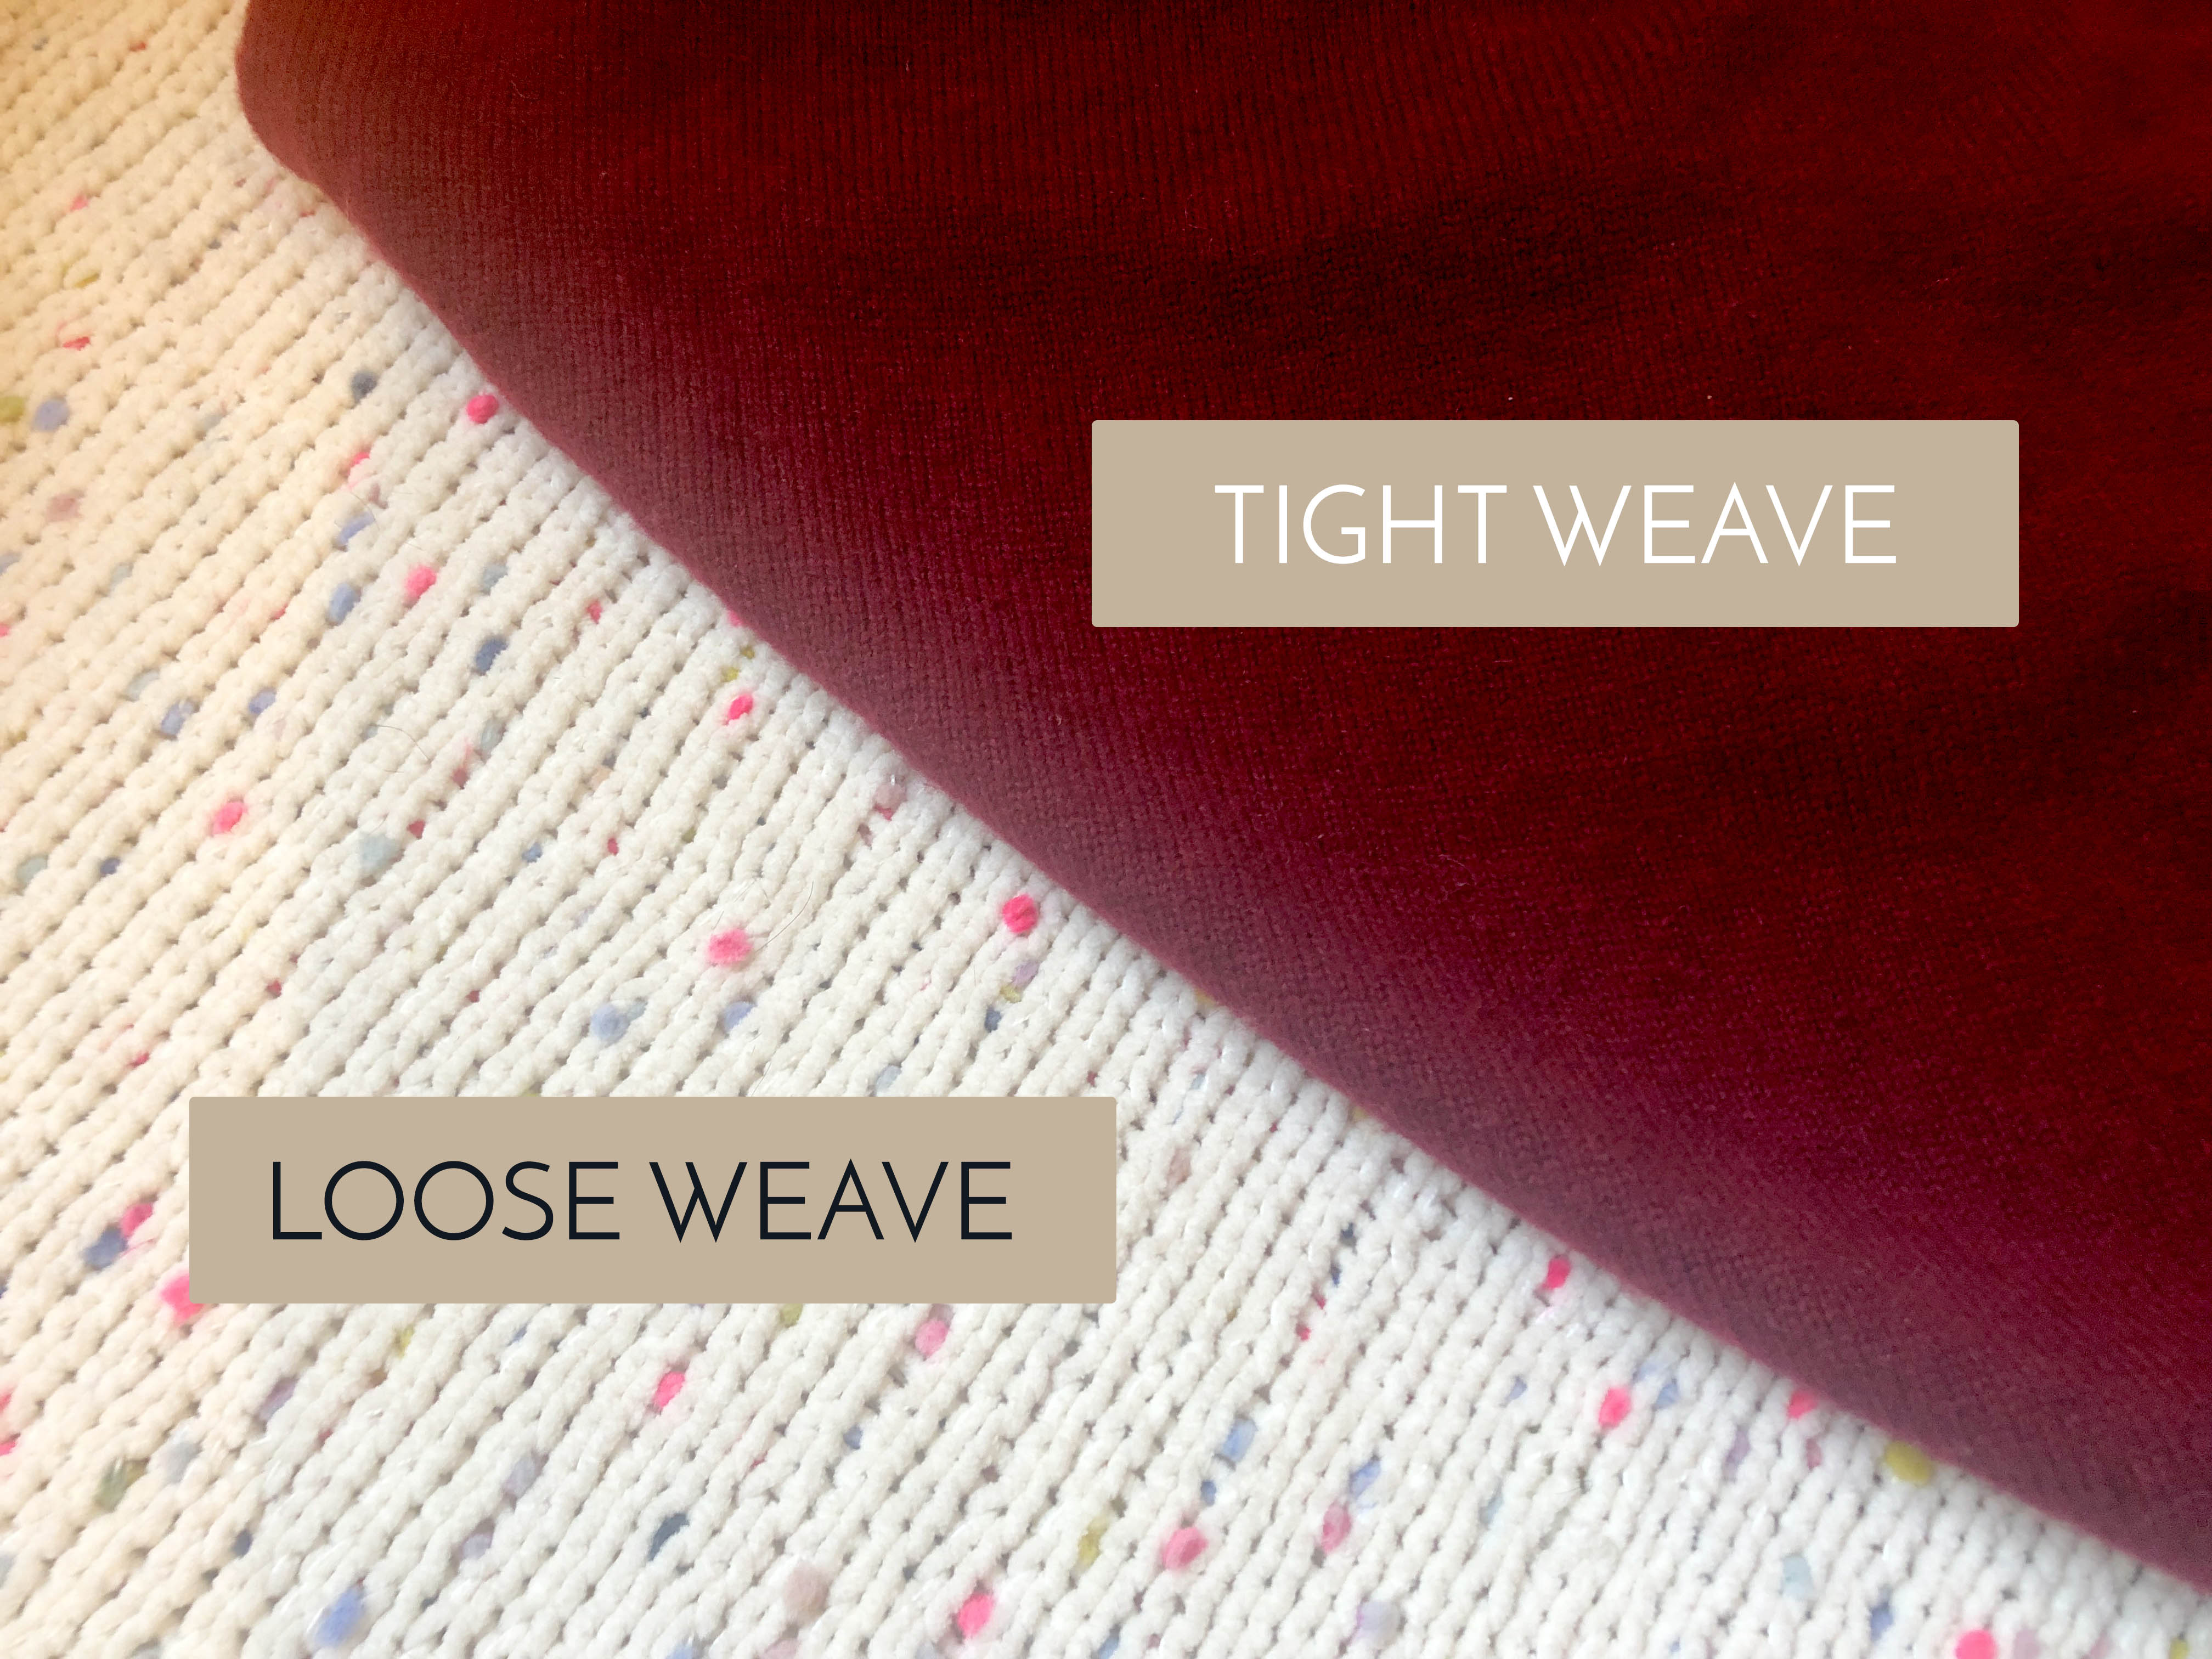 Loose and tight weave woven woollen fabrics